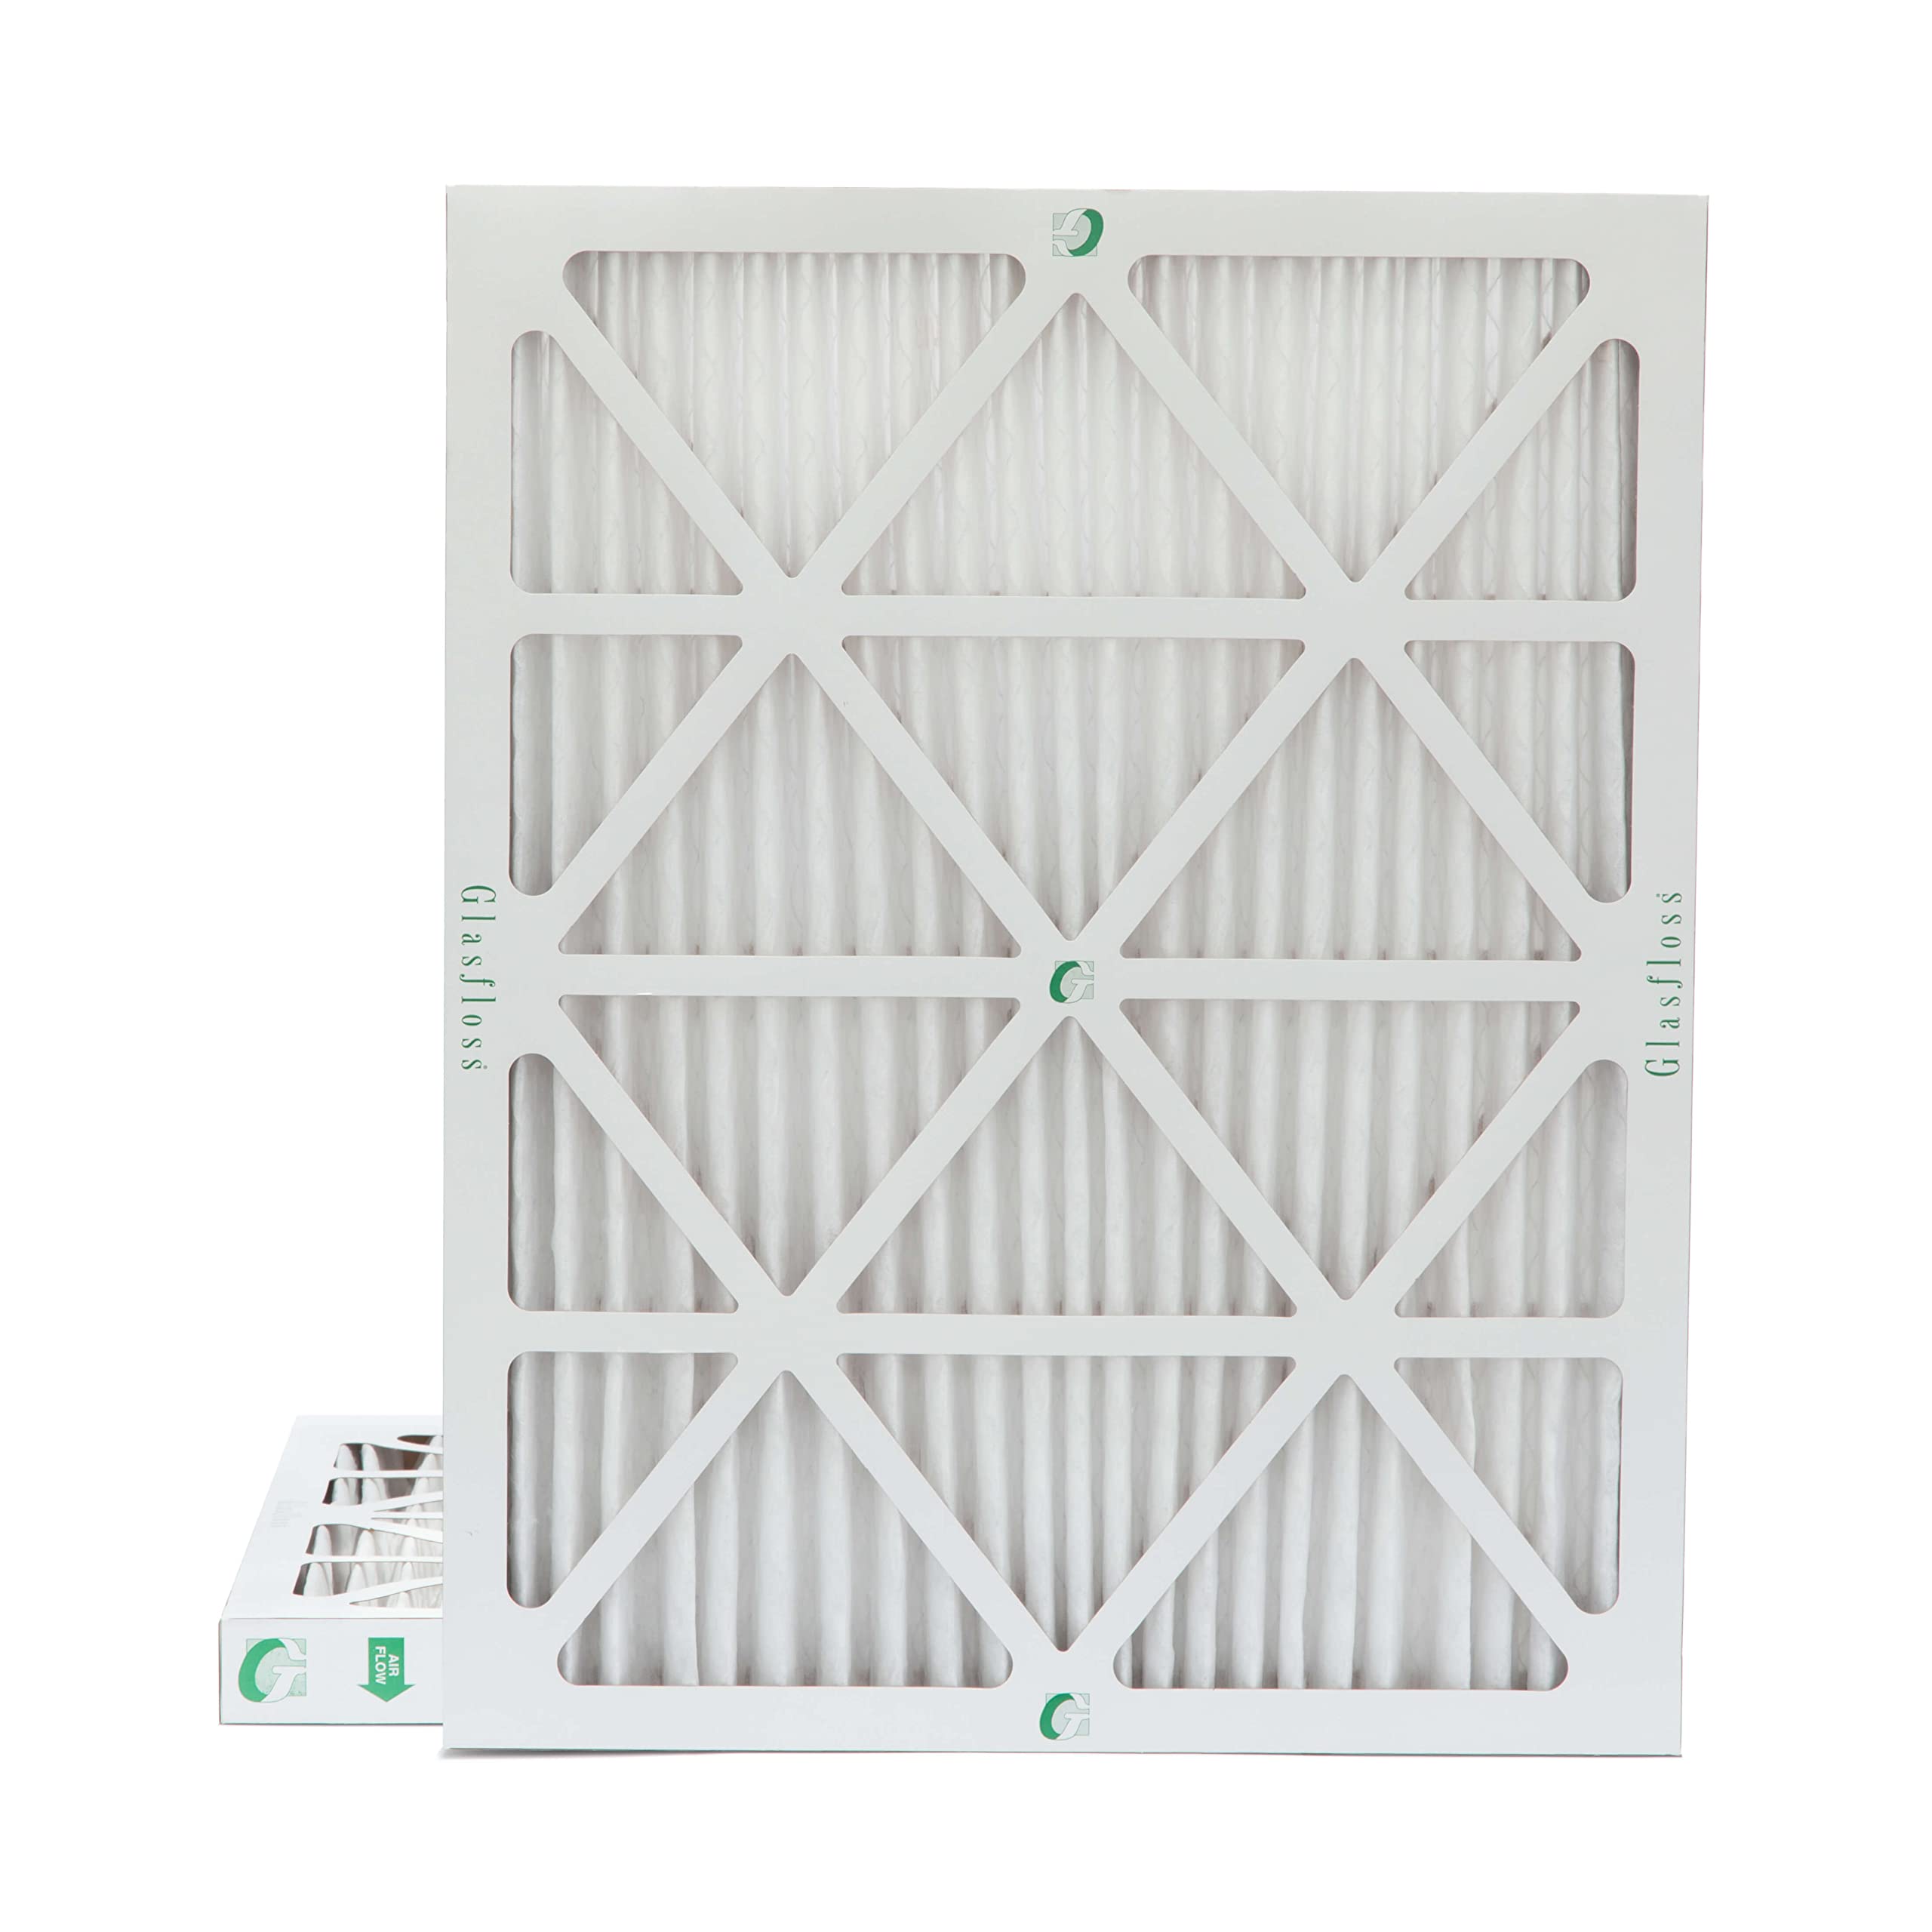 Glasfloss 20x25x2 MERV 10 Pleated 2" Inch AC Furnace Air Filters Quantity 2. Actual Size: 19-1/2 x 24-1/2 x 1-3/4